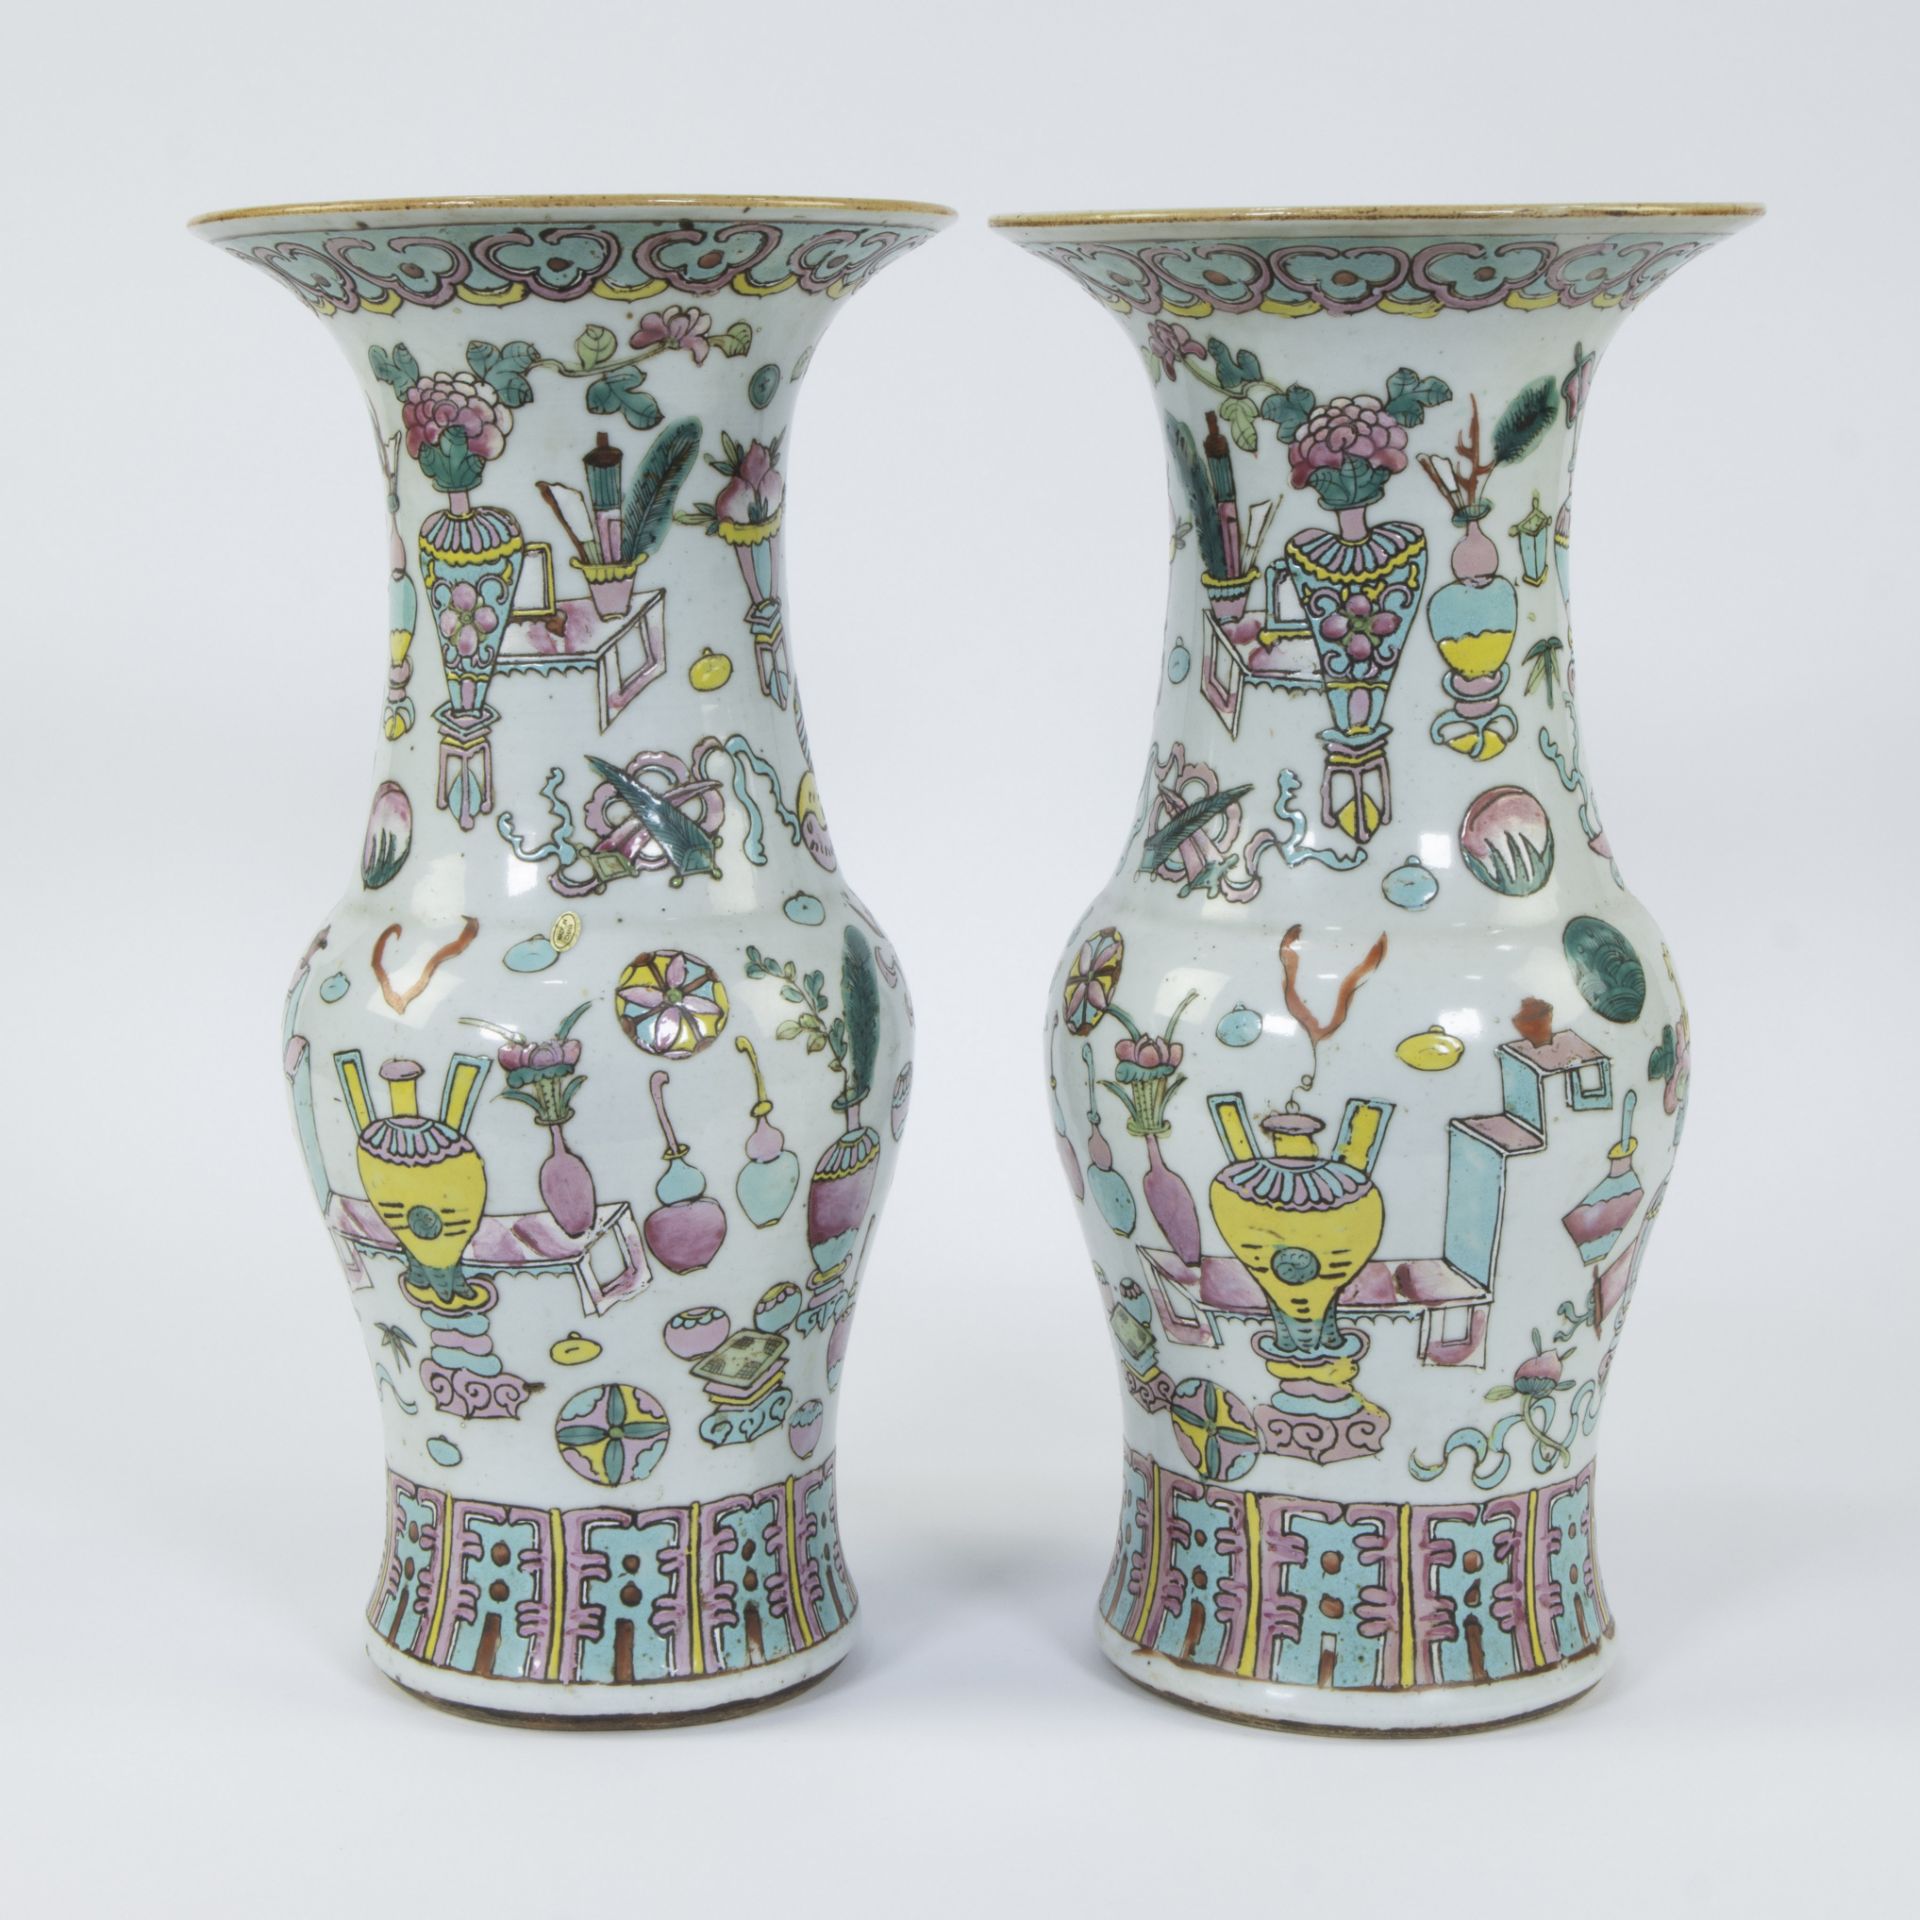 Pair of Chinese famille rose Yenyen vases with decoration of valuables, 19th century - Image 3 of 6